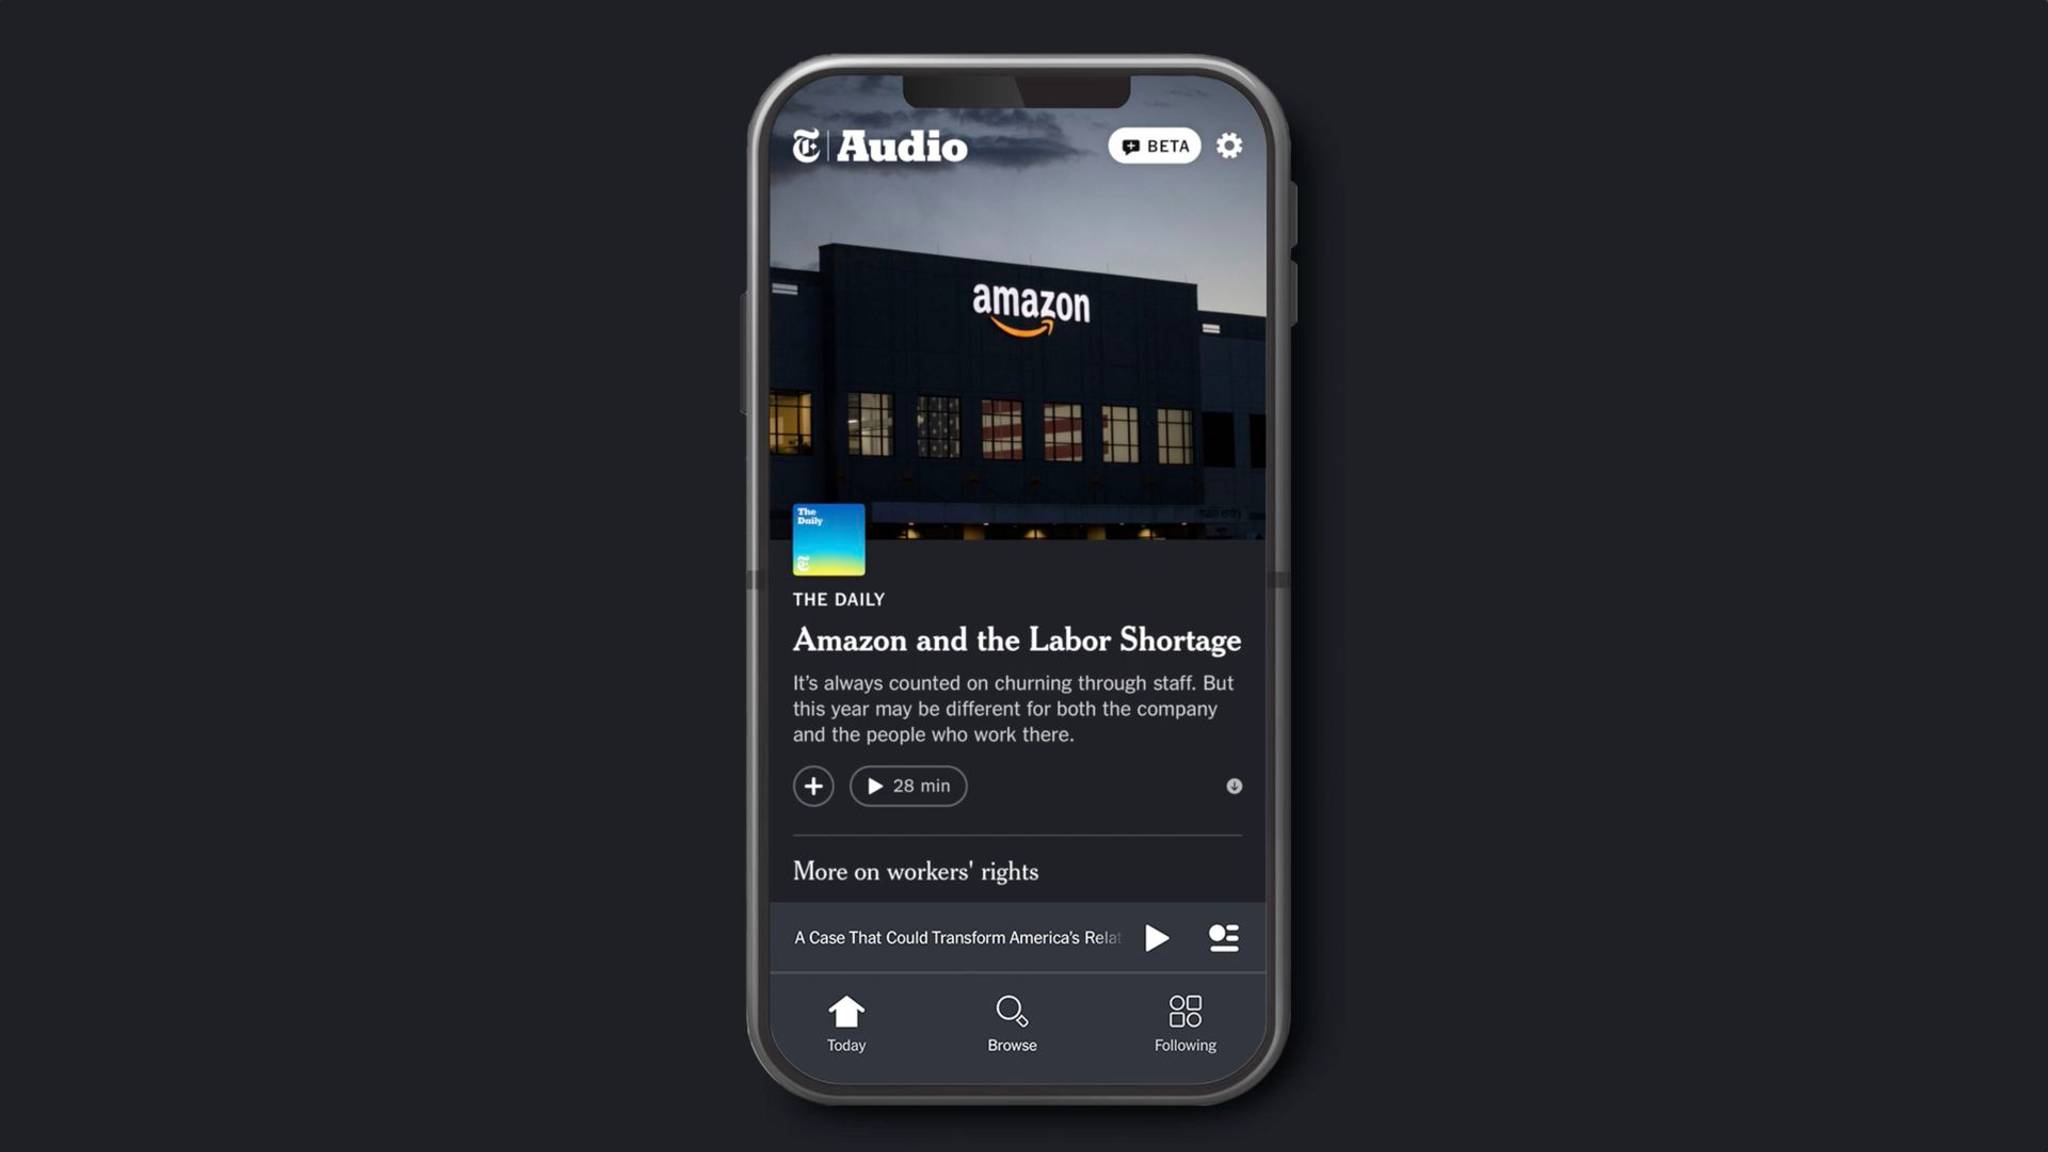 New York Times app caters to audio-focused news lovers